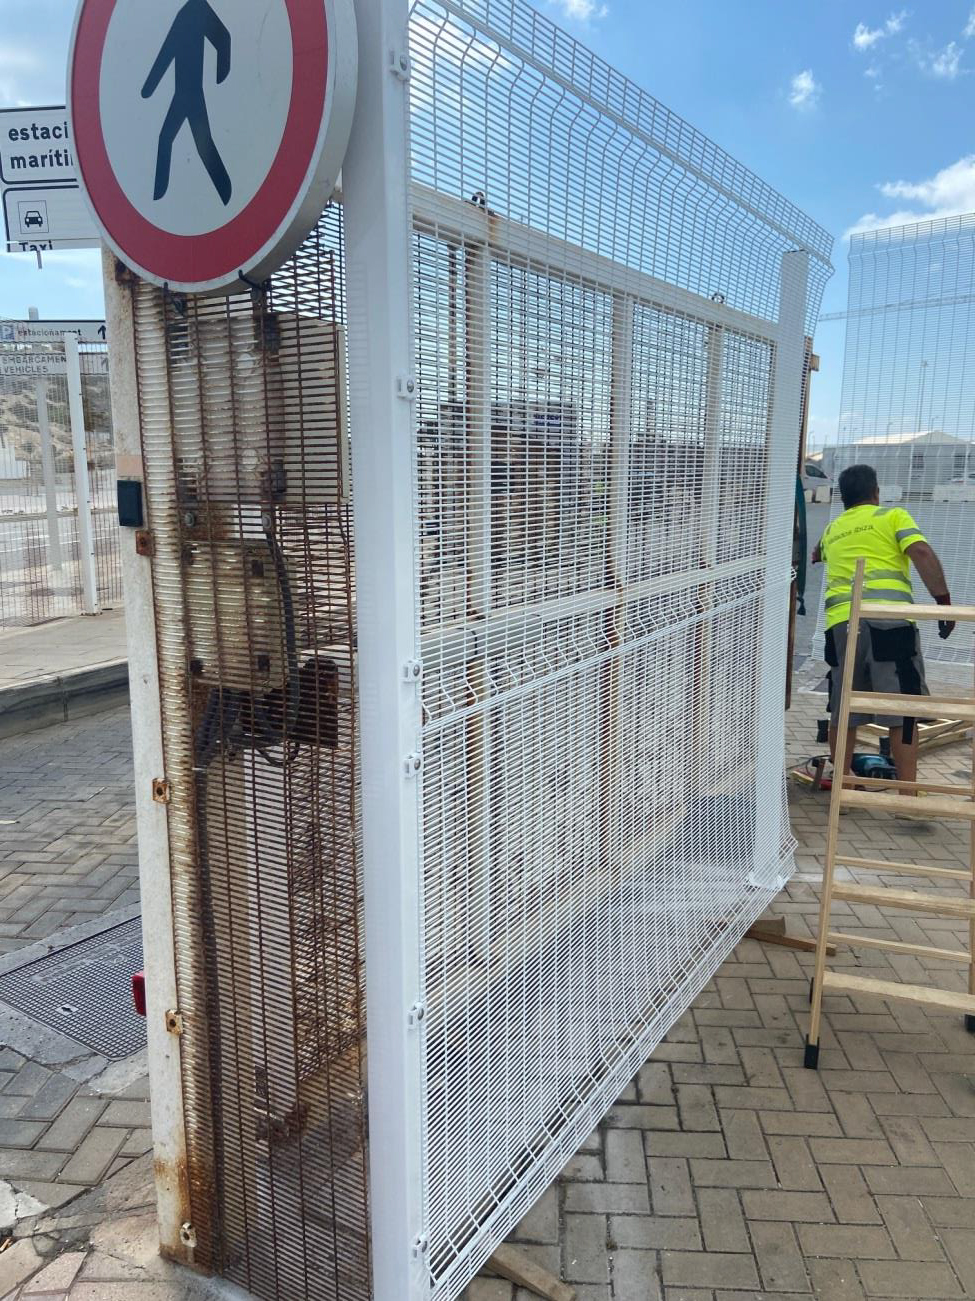 The APB begins work to improve the security of the controlled area in the Port of Eivissa with new fencing and access gates